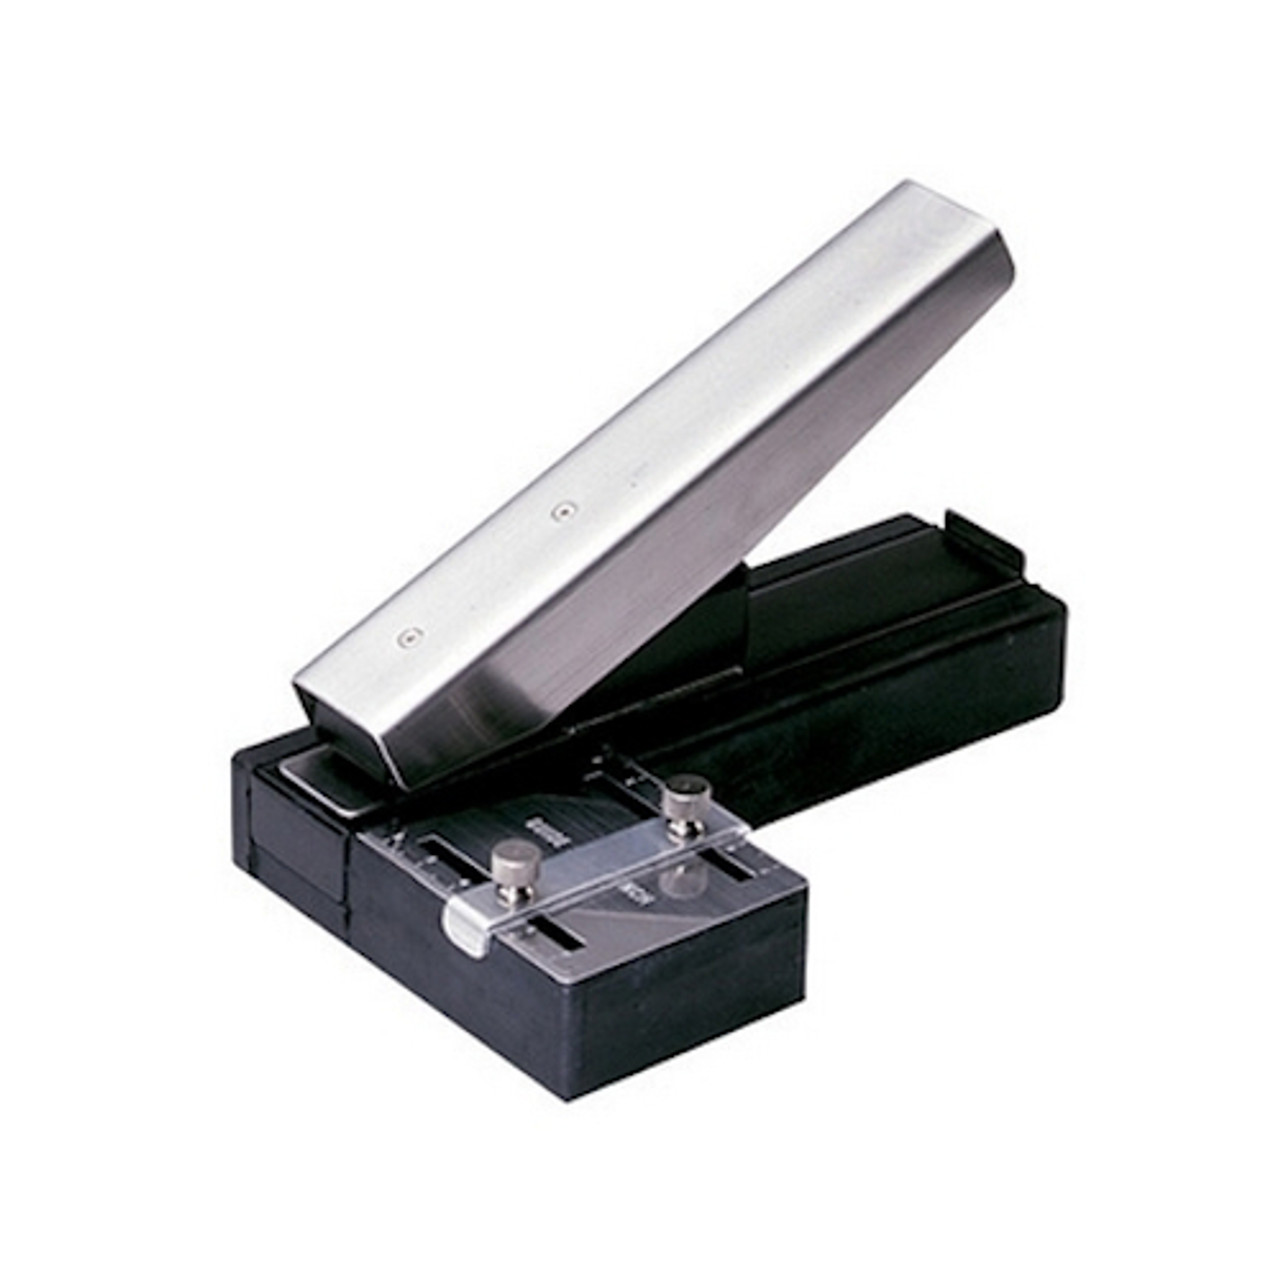 Brady ID People Stapler-Style Slot Punch w/ Adjustable Guide